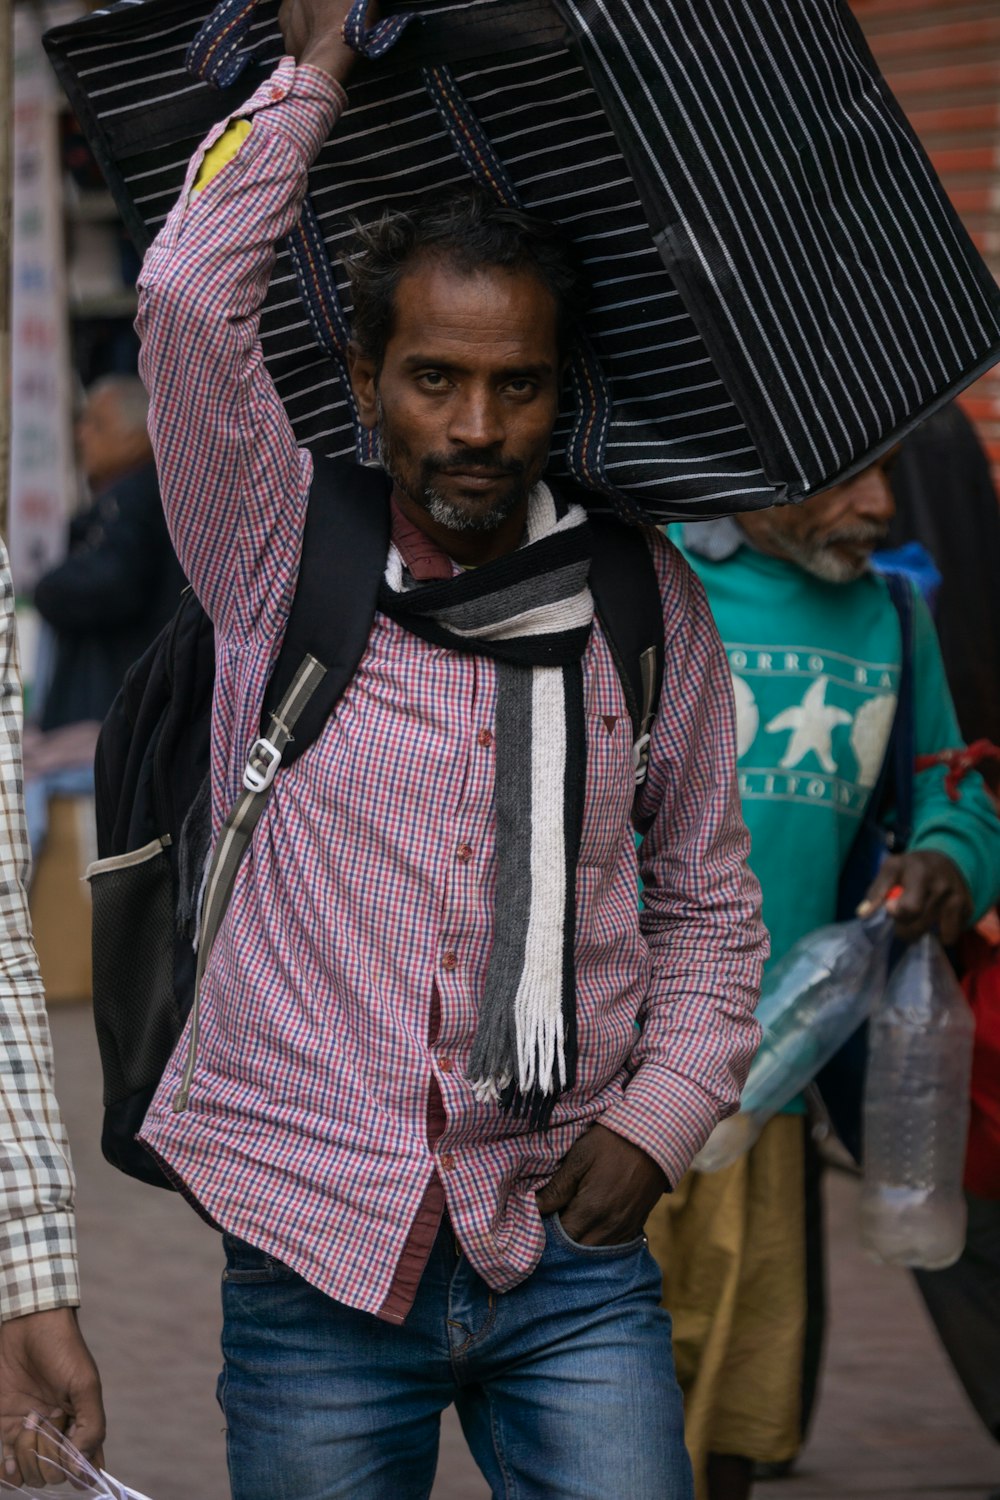 a man carrying a large piece of luggage on his head